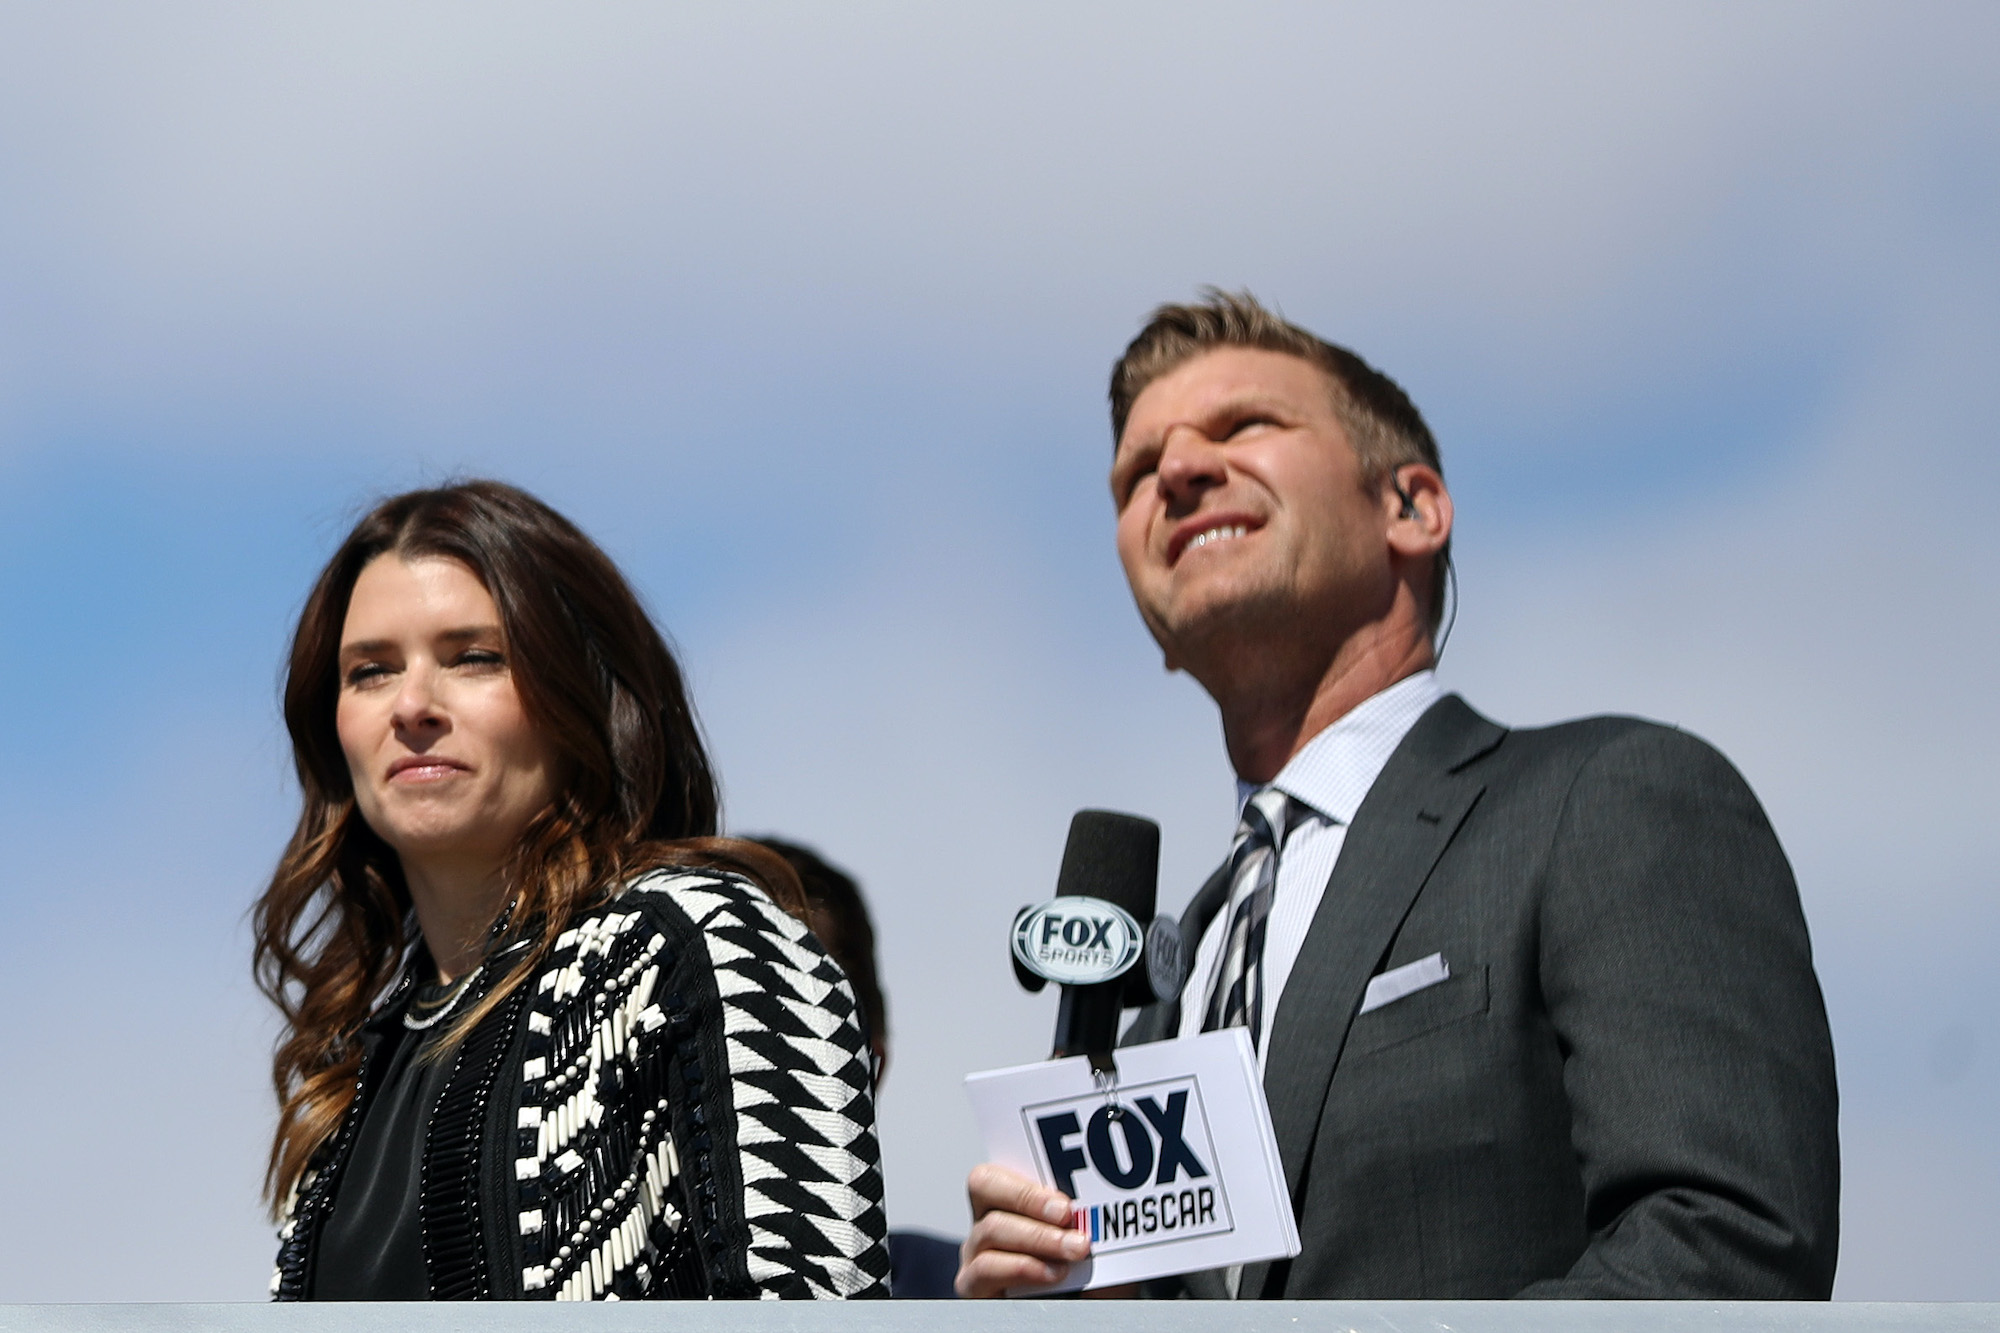 Danica Patrick and Clint Bowyer look on at Las Vegas